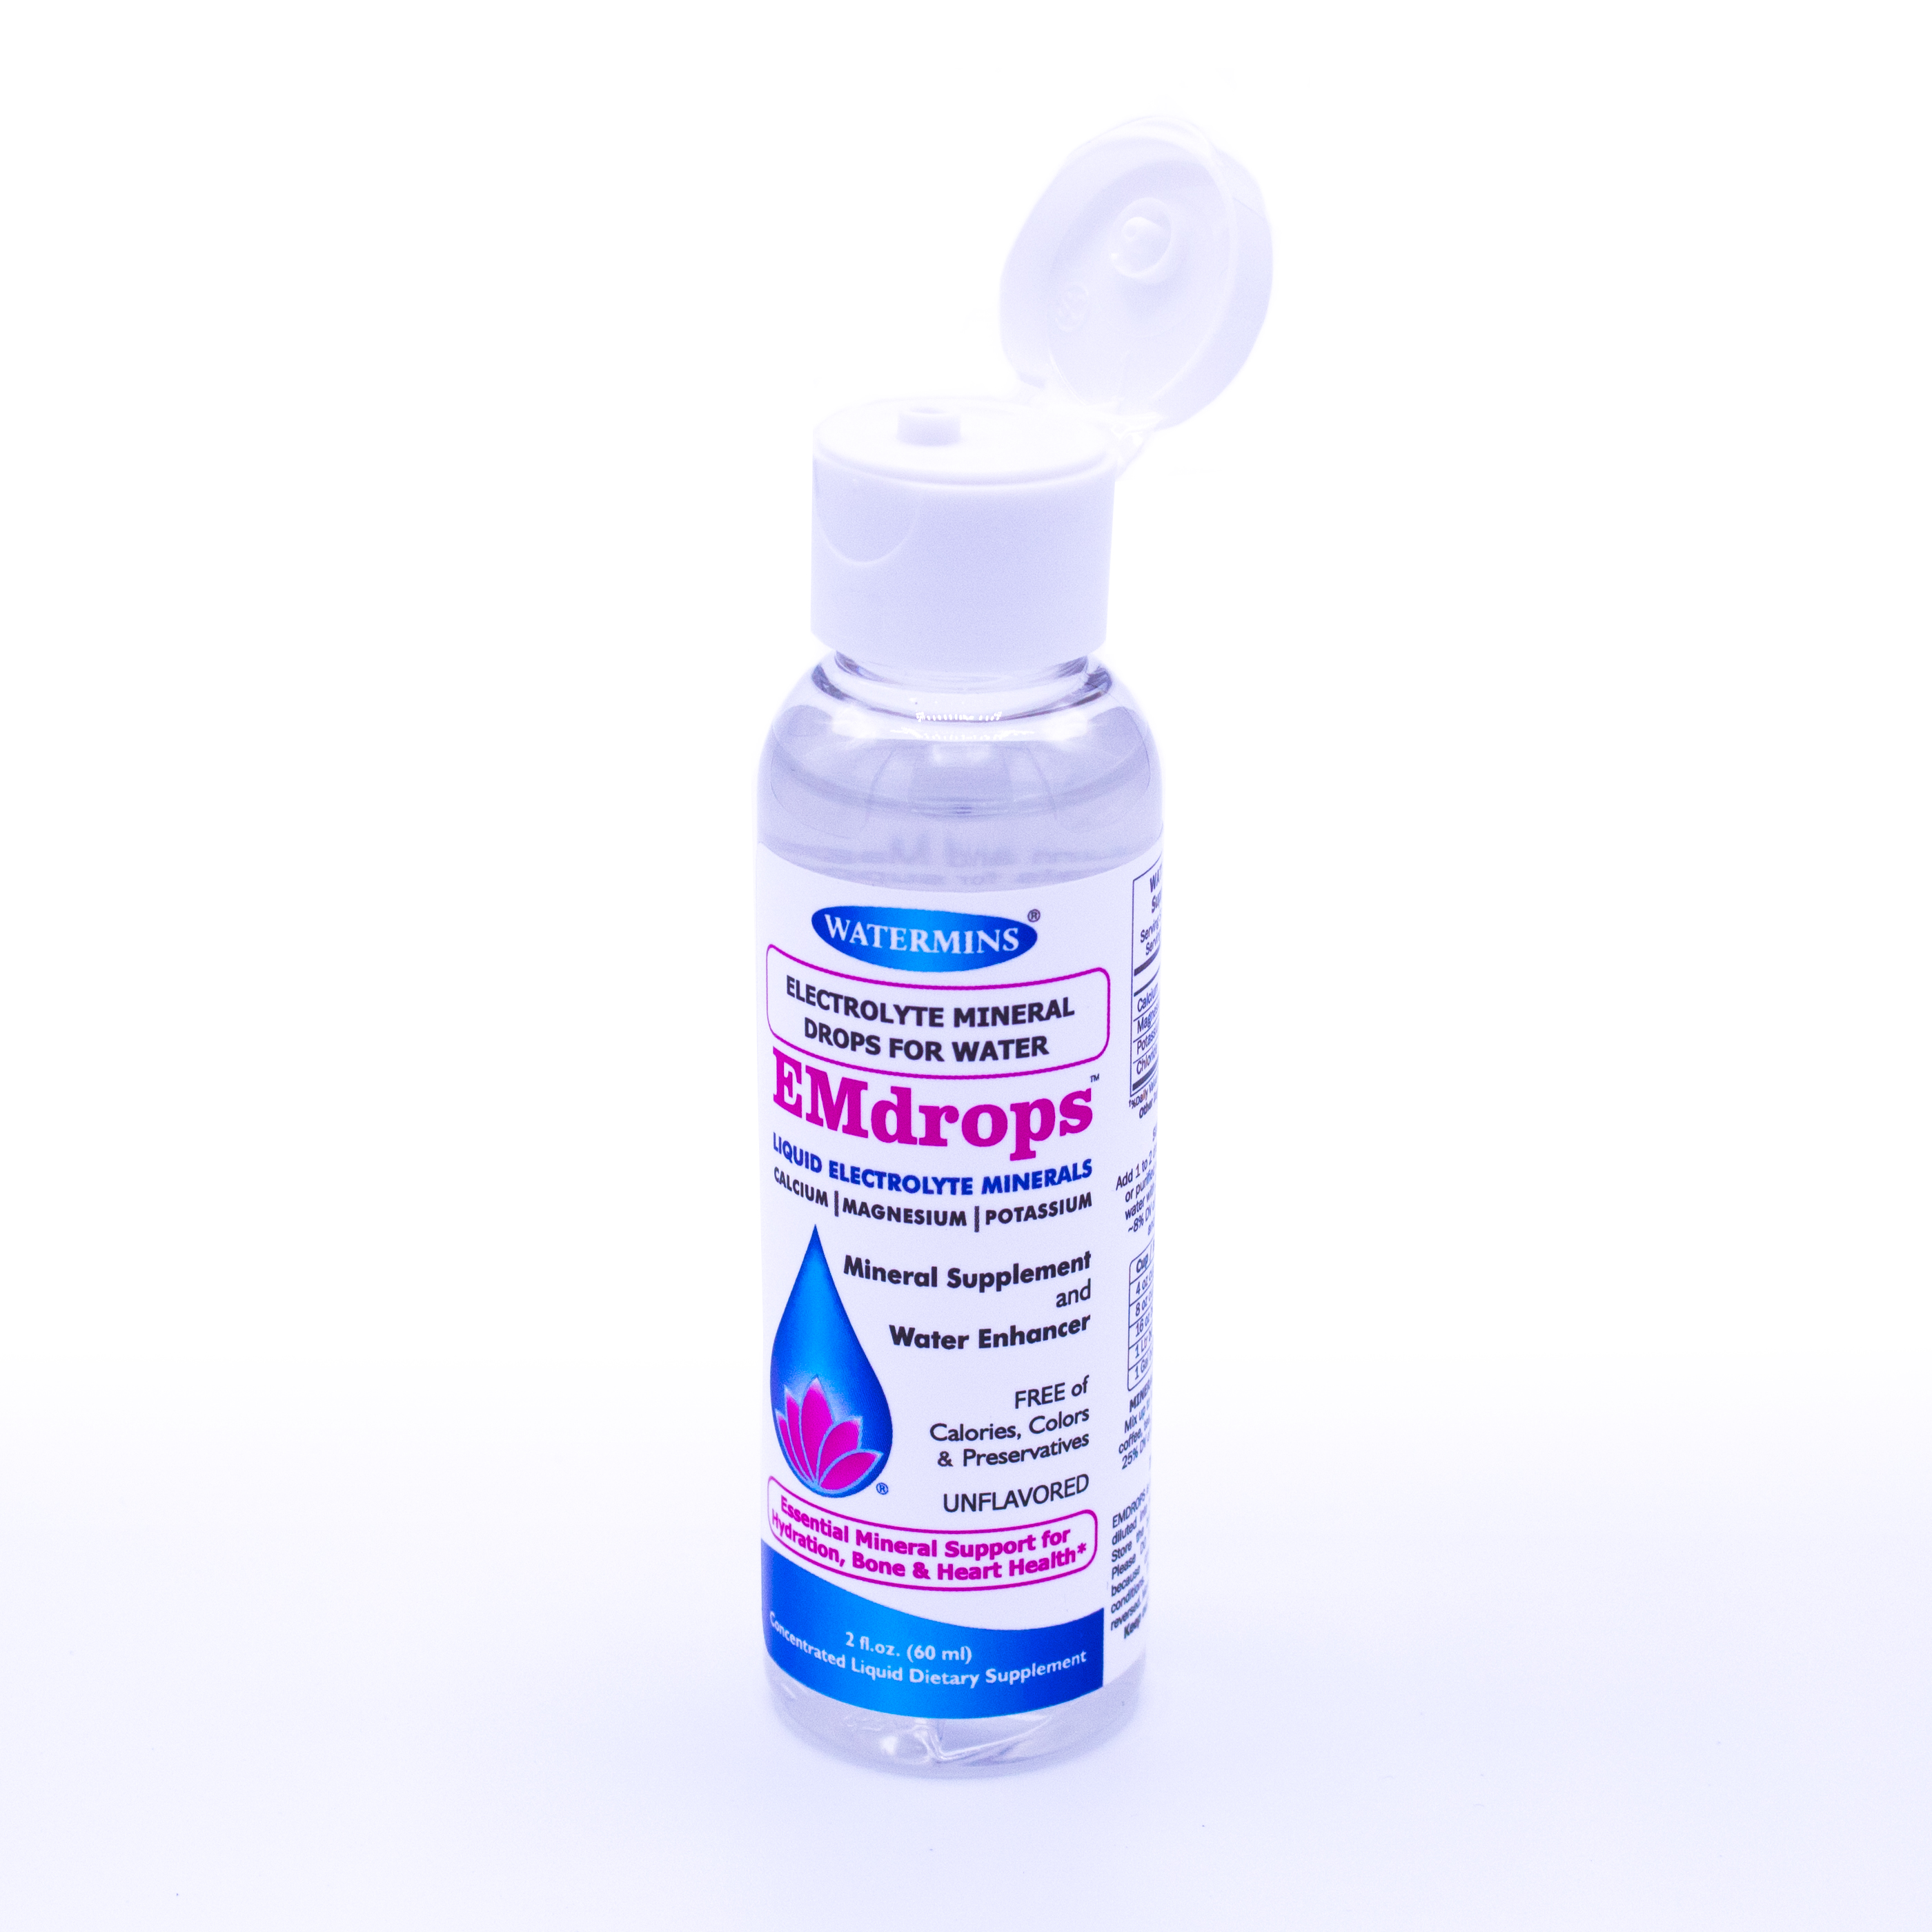 EMDROPS by Watermins - Electrolyte Mineral Drops - Product Image - Bottle Front View